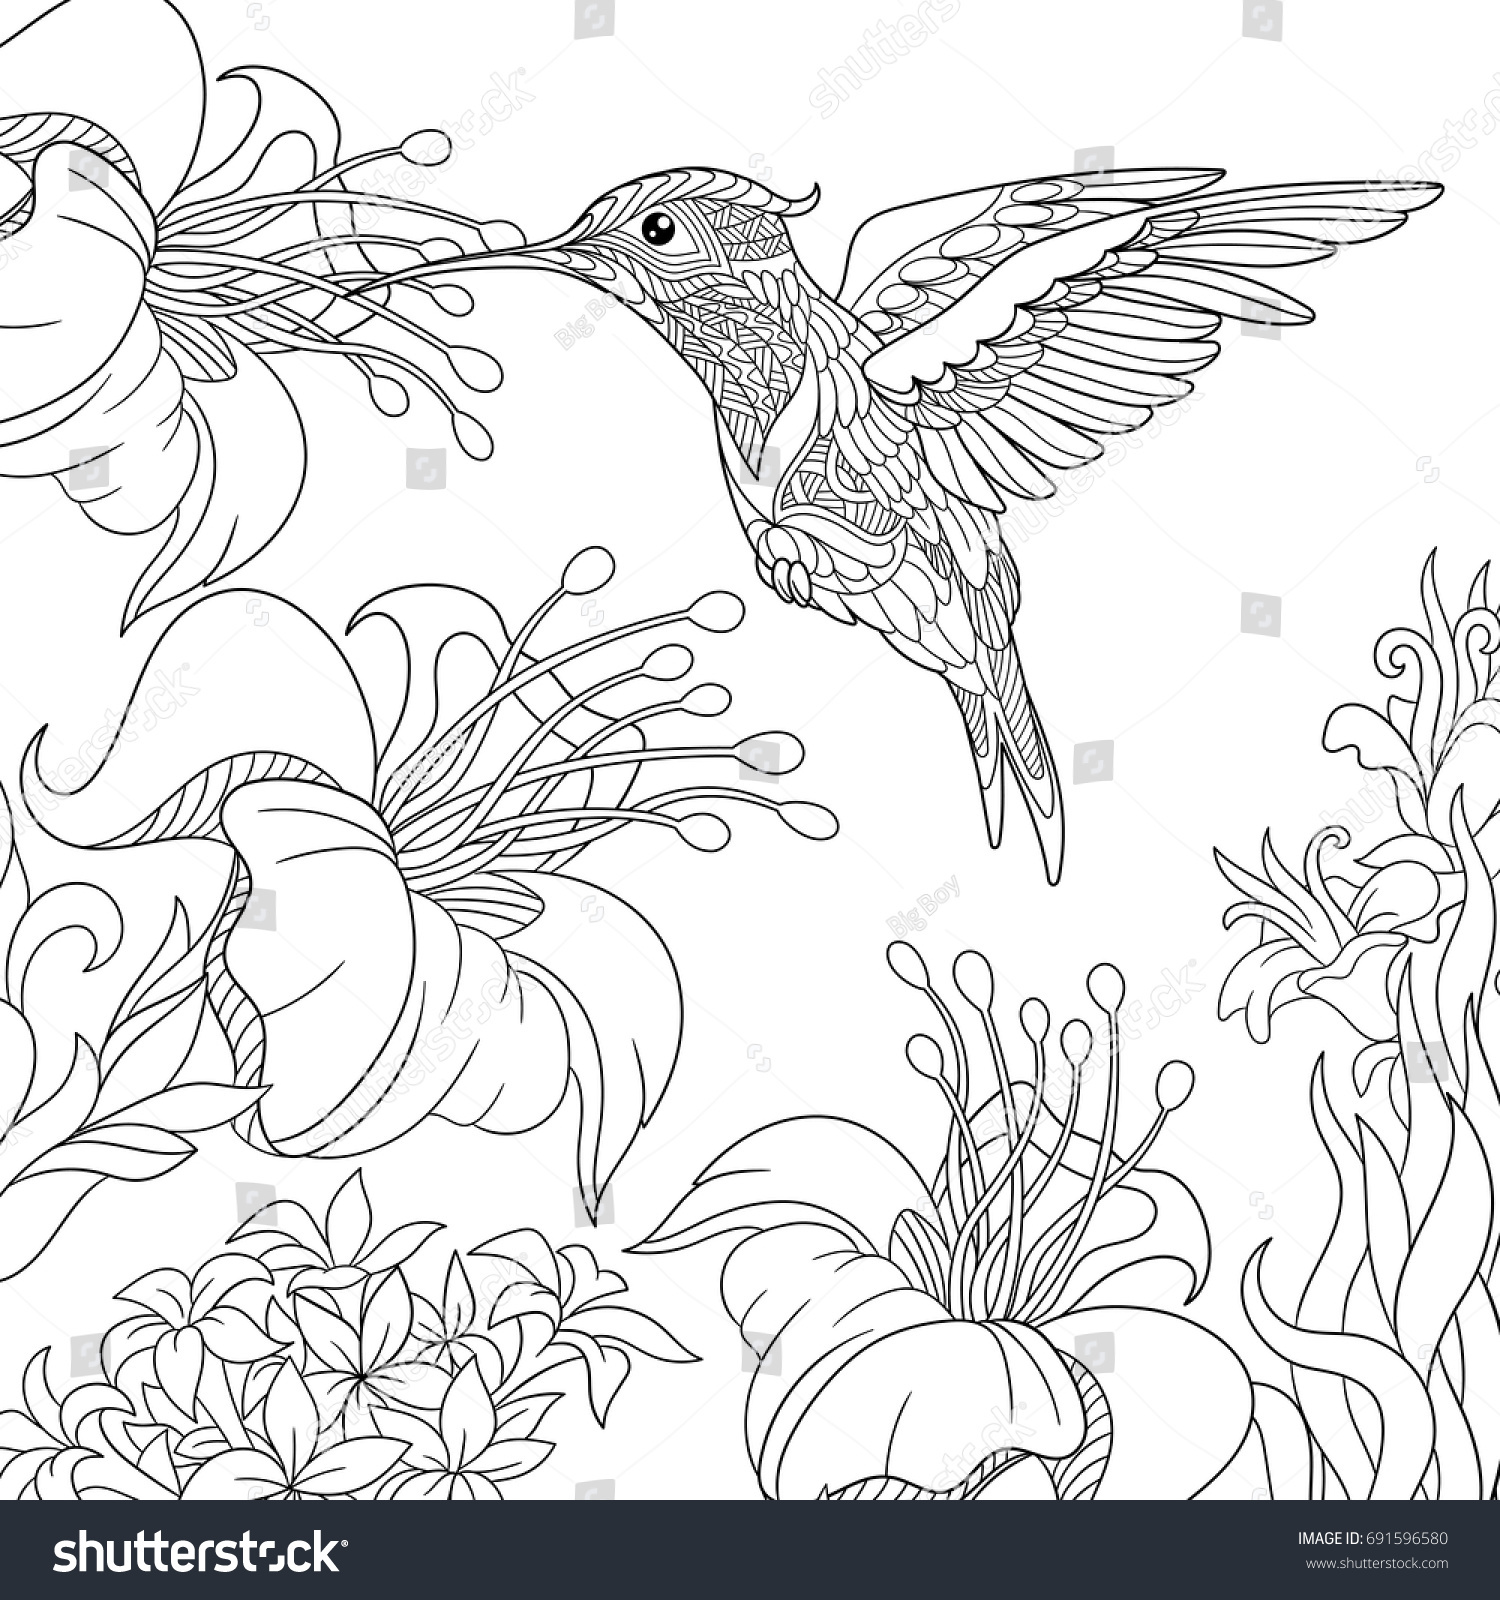 Coloring page of hummingbird and hibiscus flowers Freehand sketch drawing for adult antistress colouring book